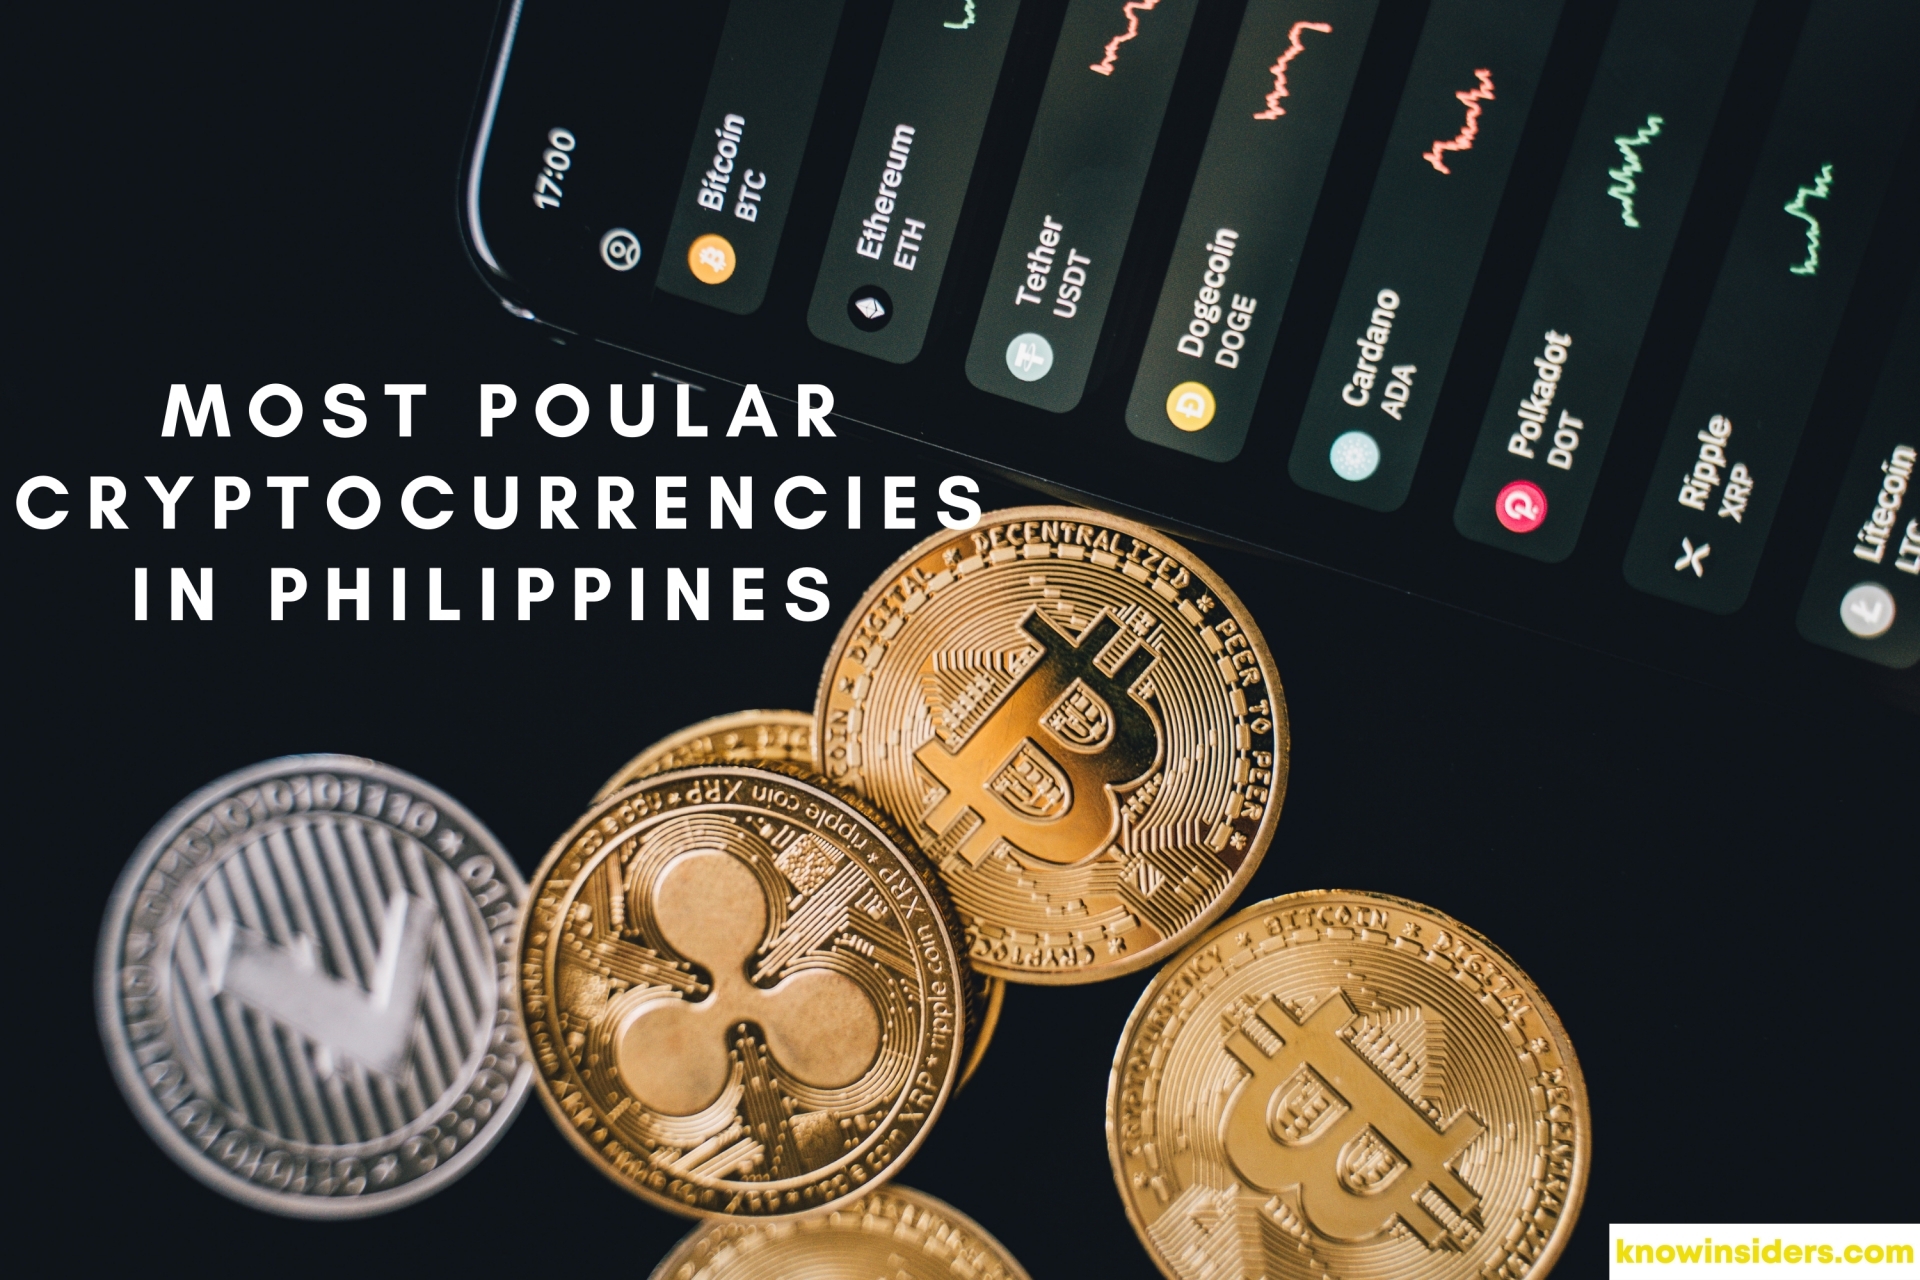 What Are The Most Popular Cryptocurrencies In Philippines?